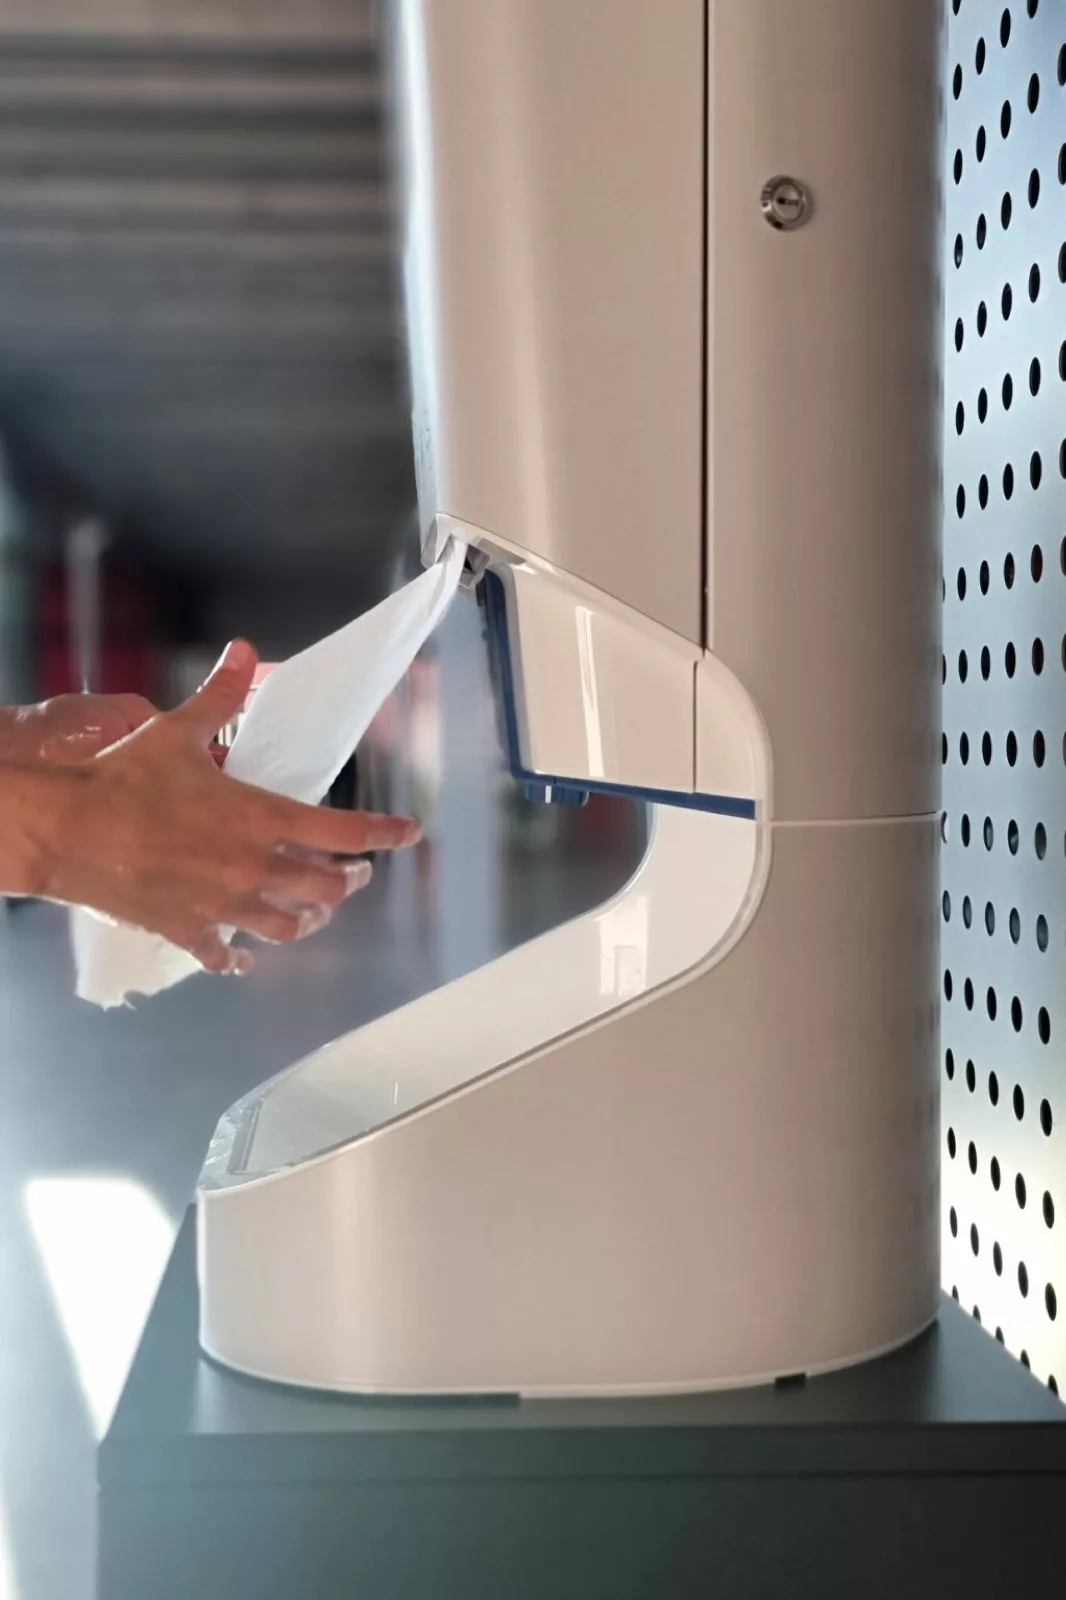 Hands receiving paper towel to dry from the Smixin handwash system